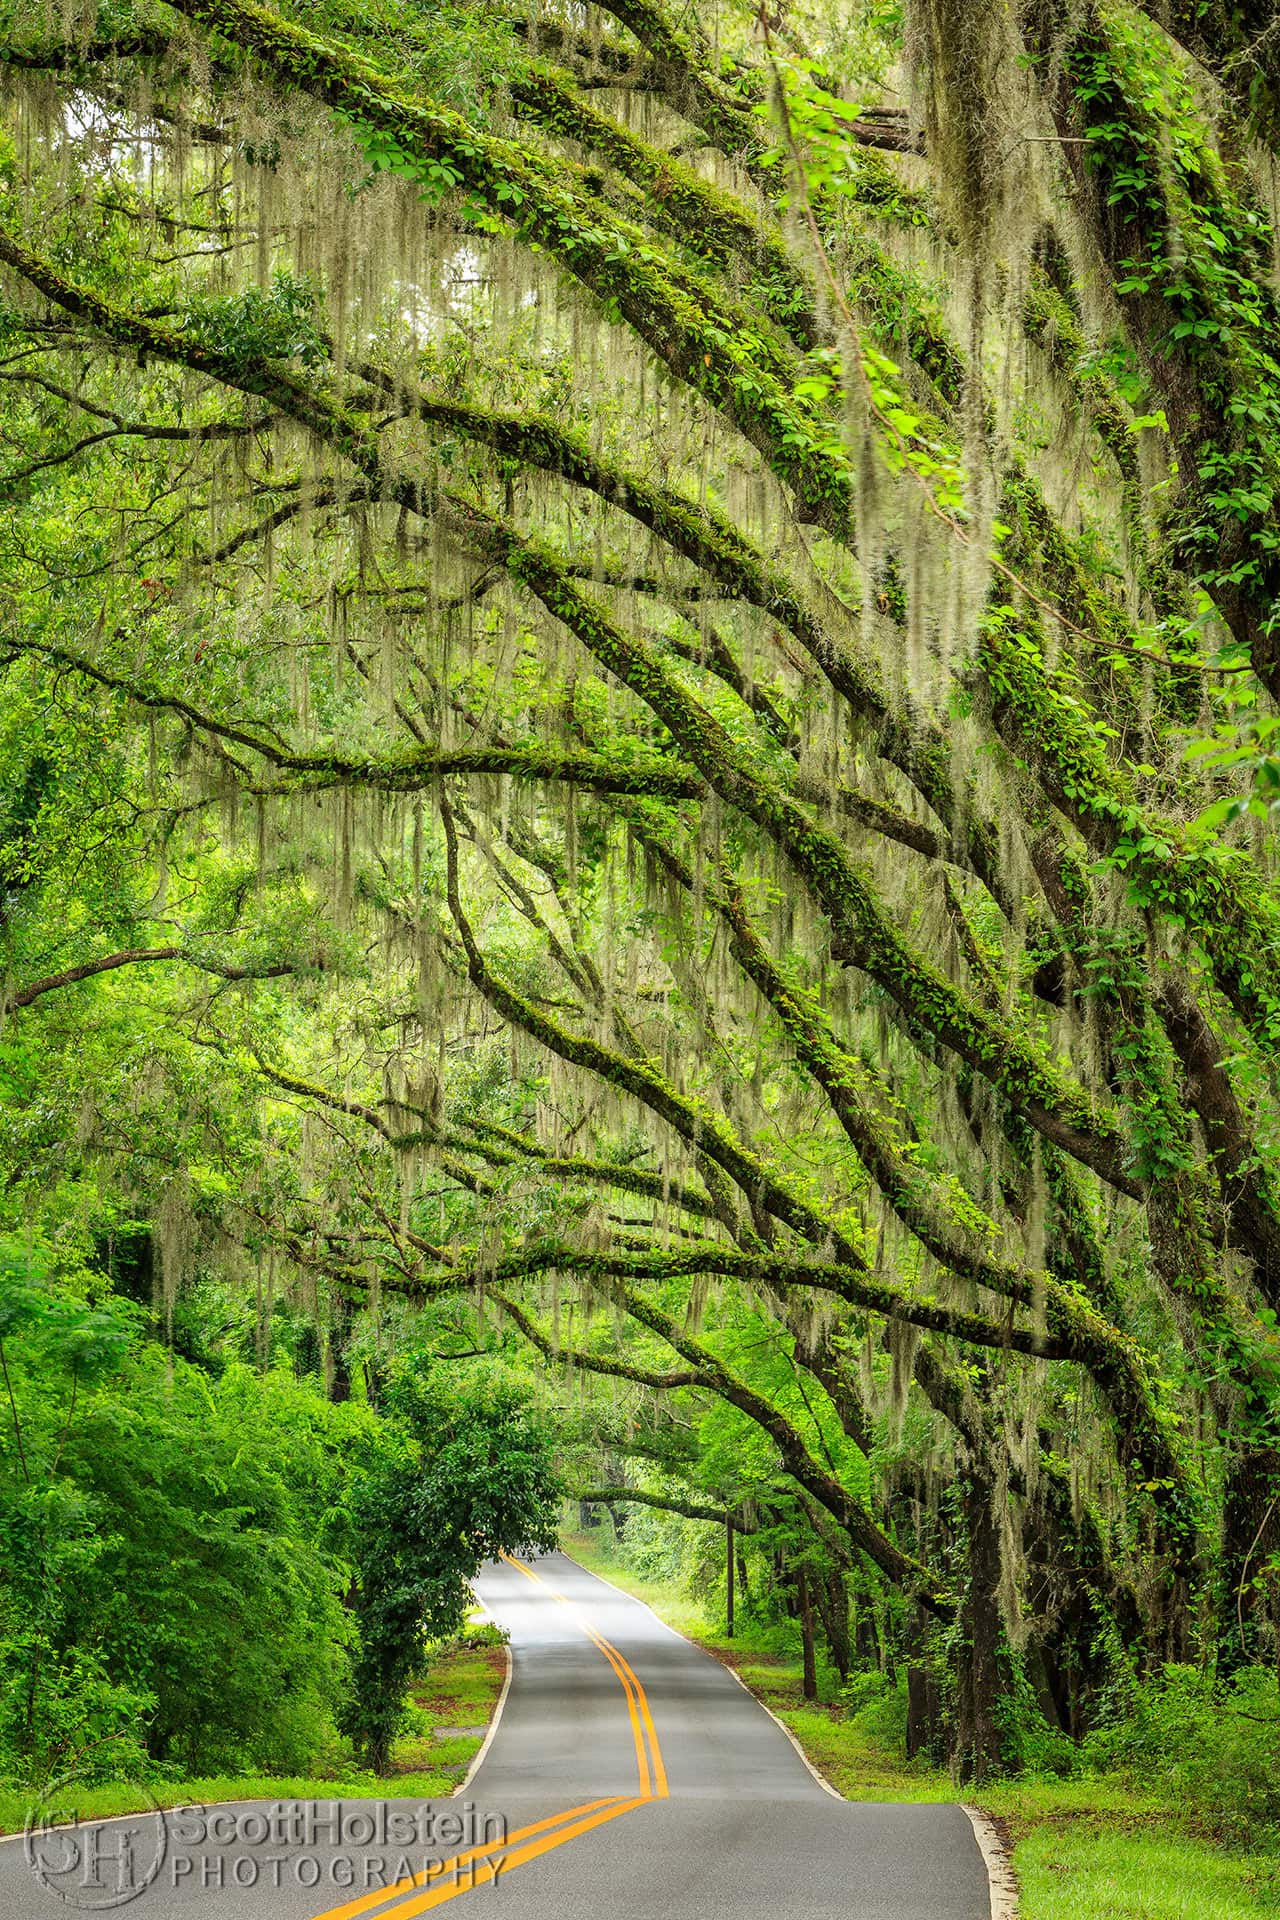 Miller Landing Road is a canopy road in Tallahassee, Florida that leads to Miller Landing on Lake Jackson.